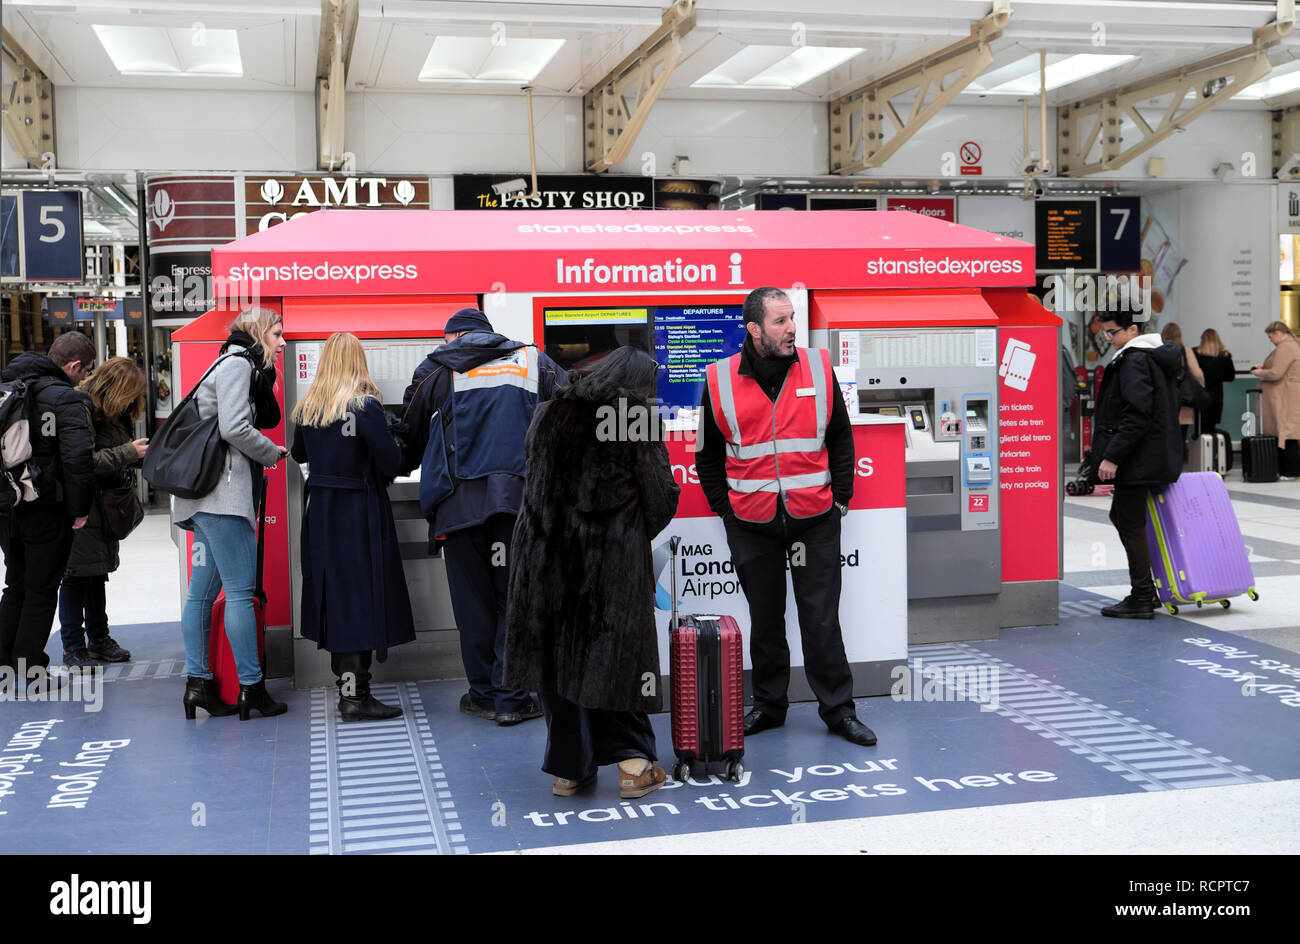 Stansted express Stanstedexpress ticket kiosk, customers and information assistant on Liverpool St Station concourse London England UK  KATHY DEWITT Stock Photo